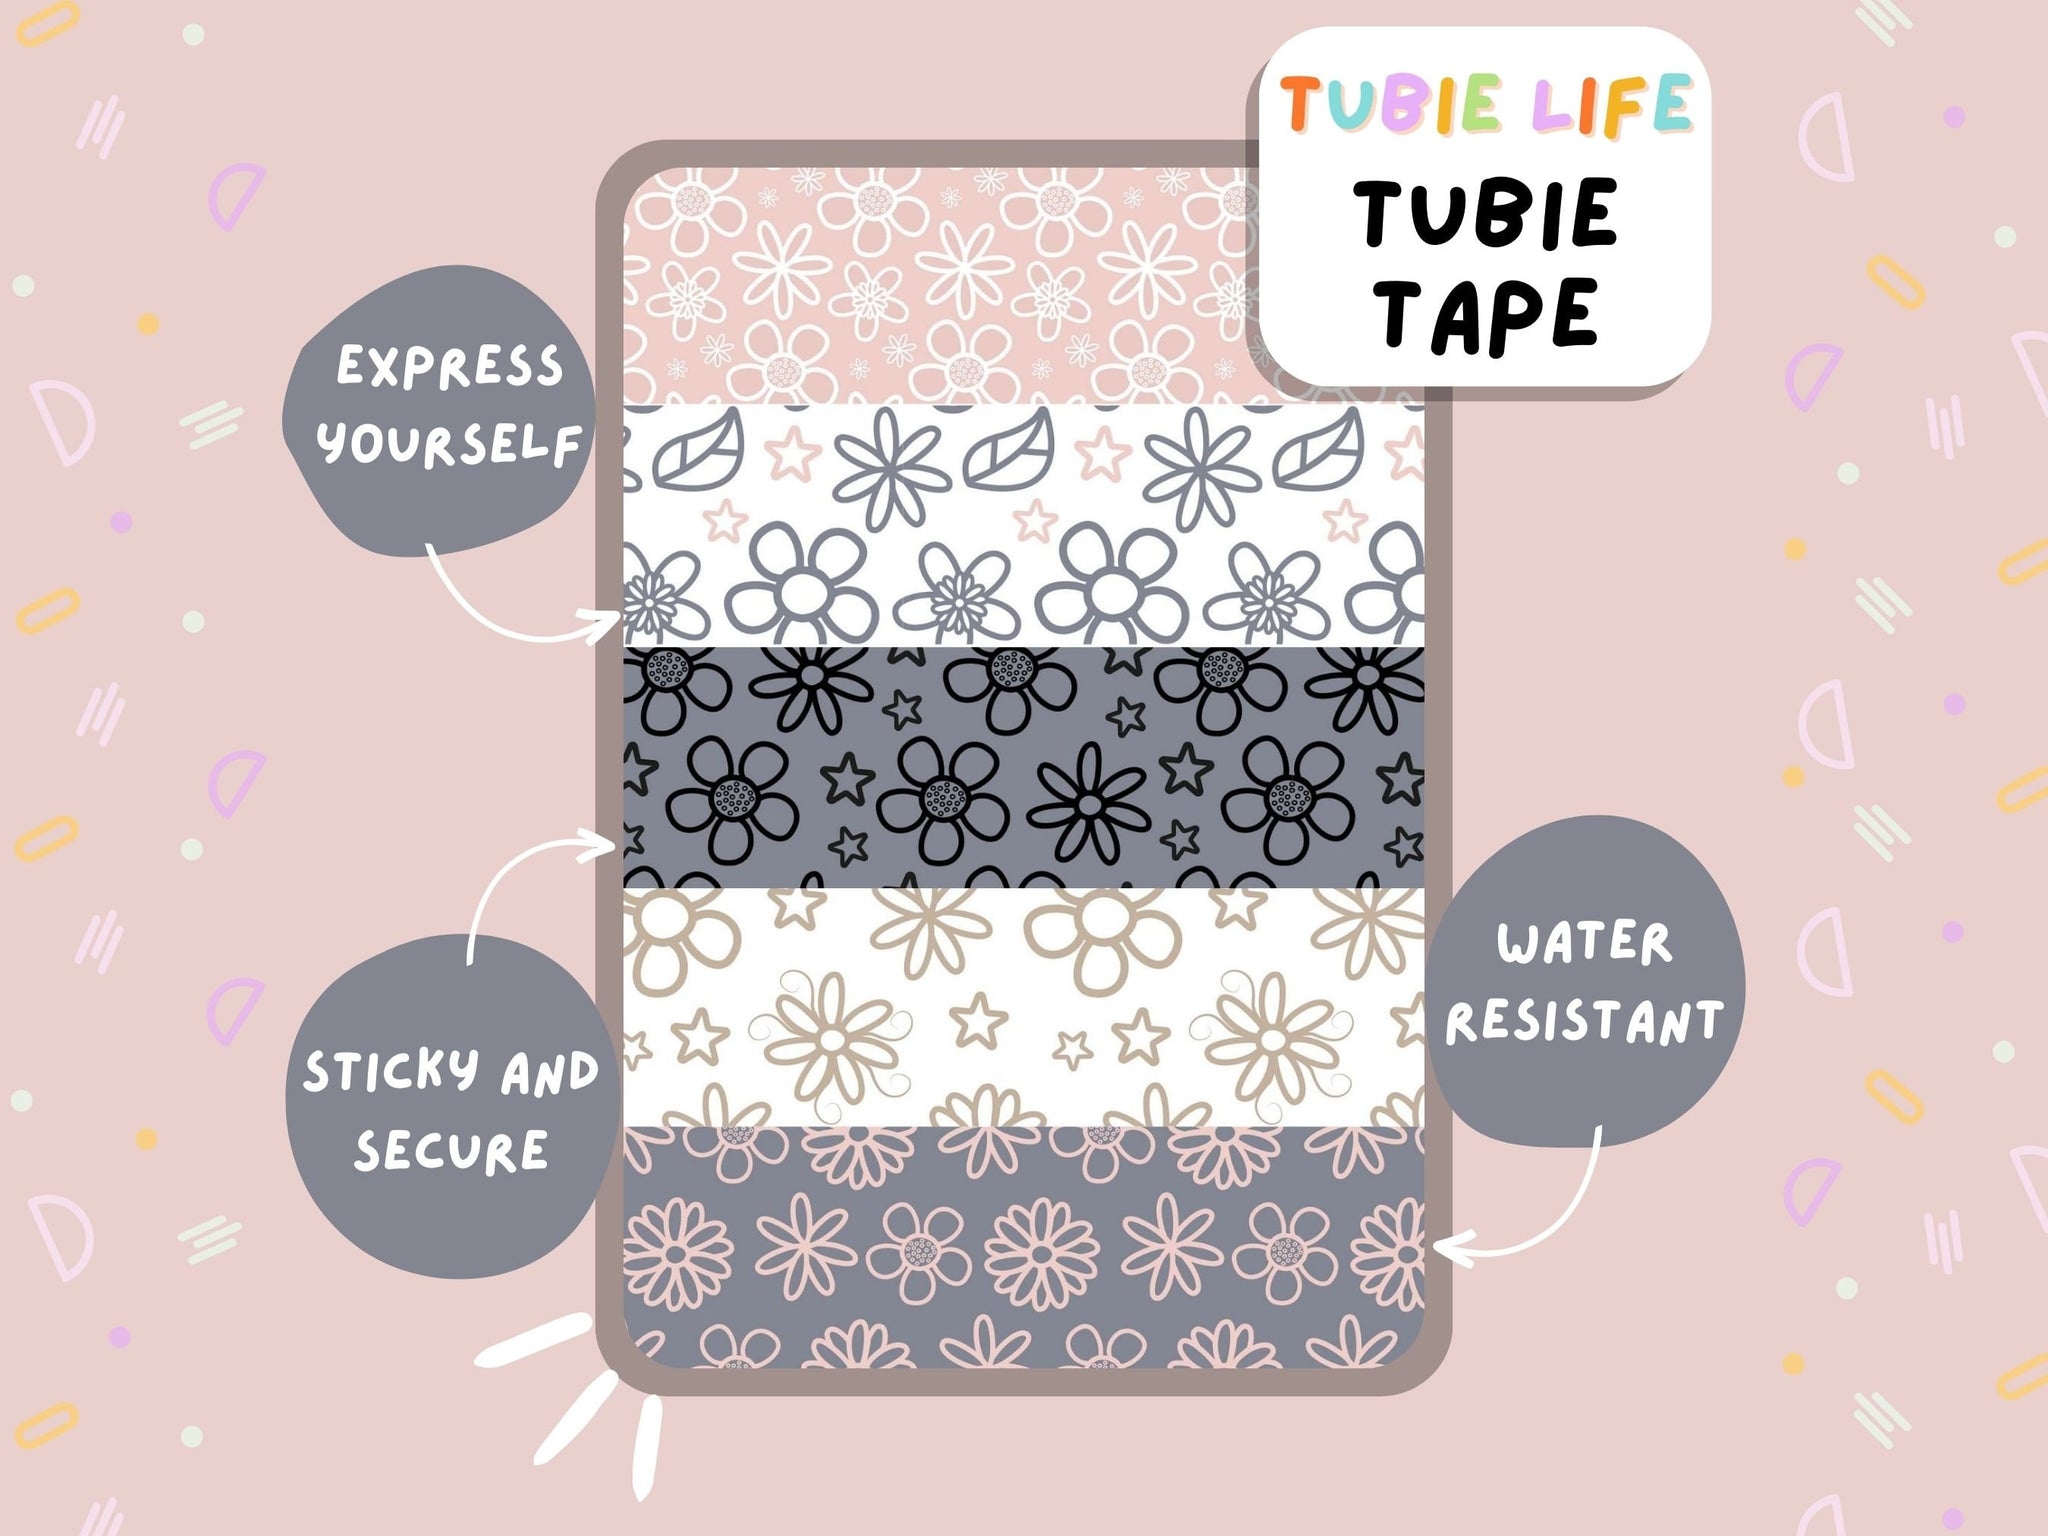 TUBIE TAPE Tubie Life daisy ng tube tape for feeding tubes and other tubing